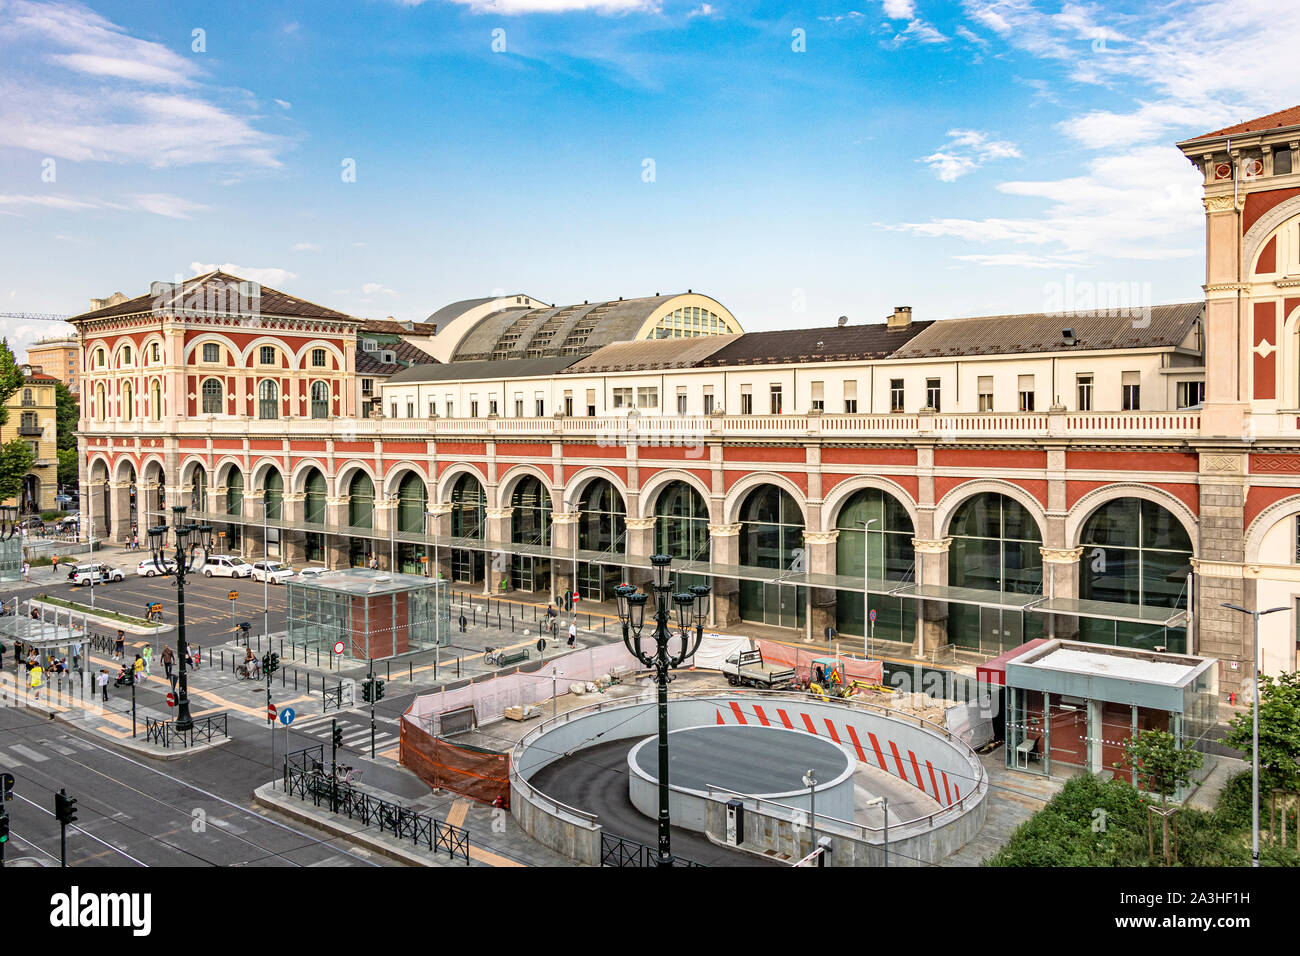 The beautiful exterior of Torino Porta Nuova railway station, the main railway station of Turin and the third busiest station in Italy Stock Photo